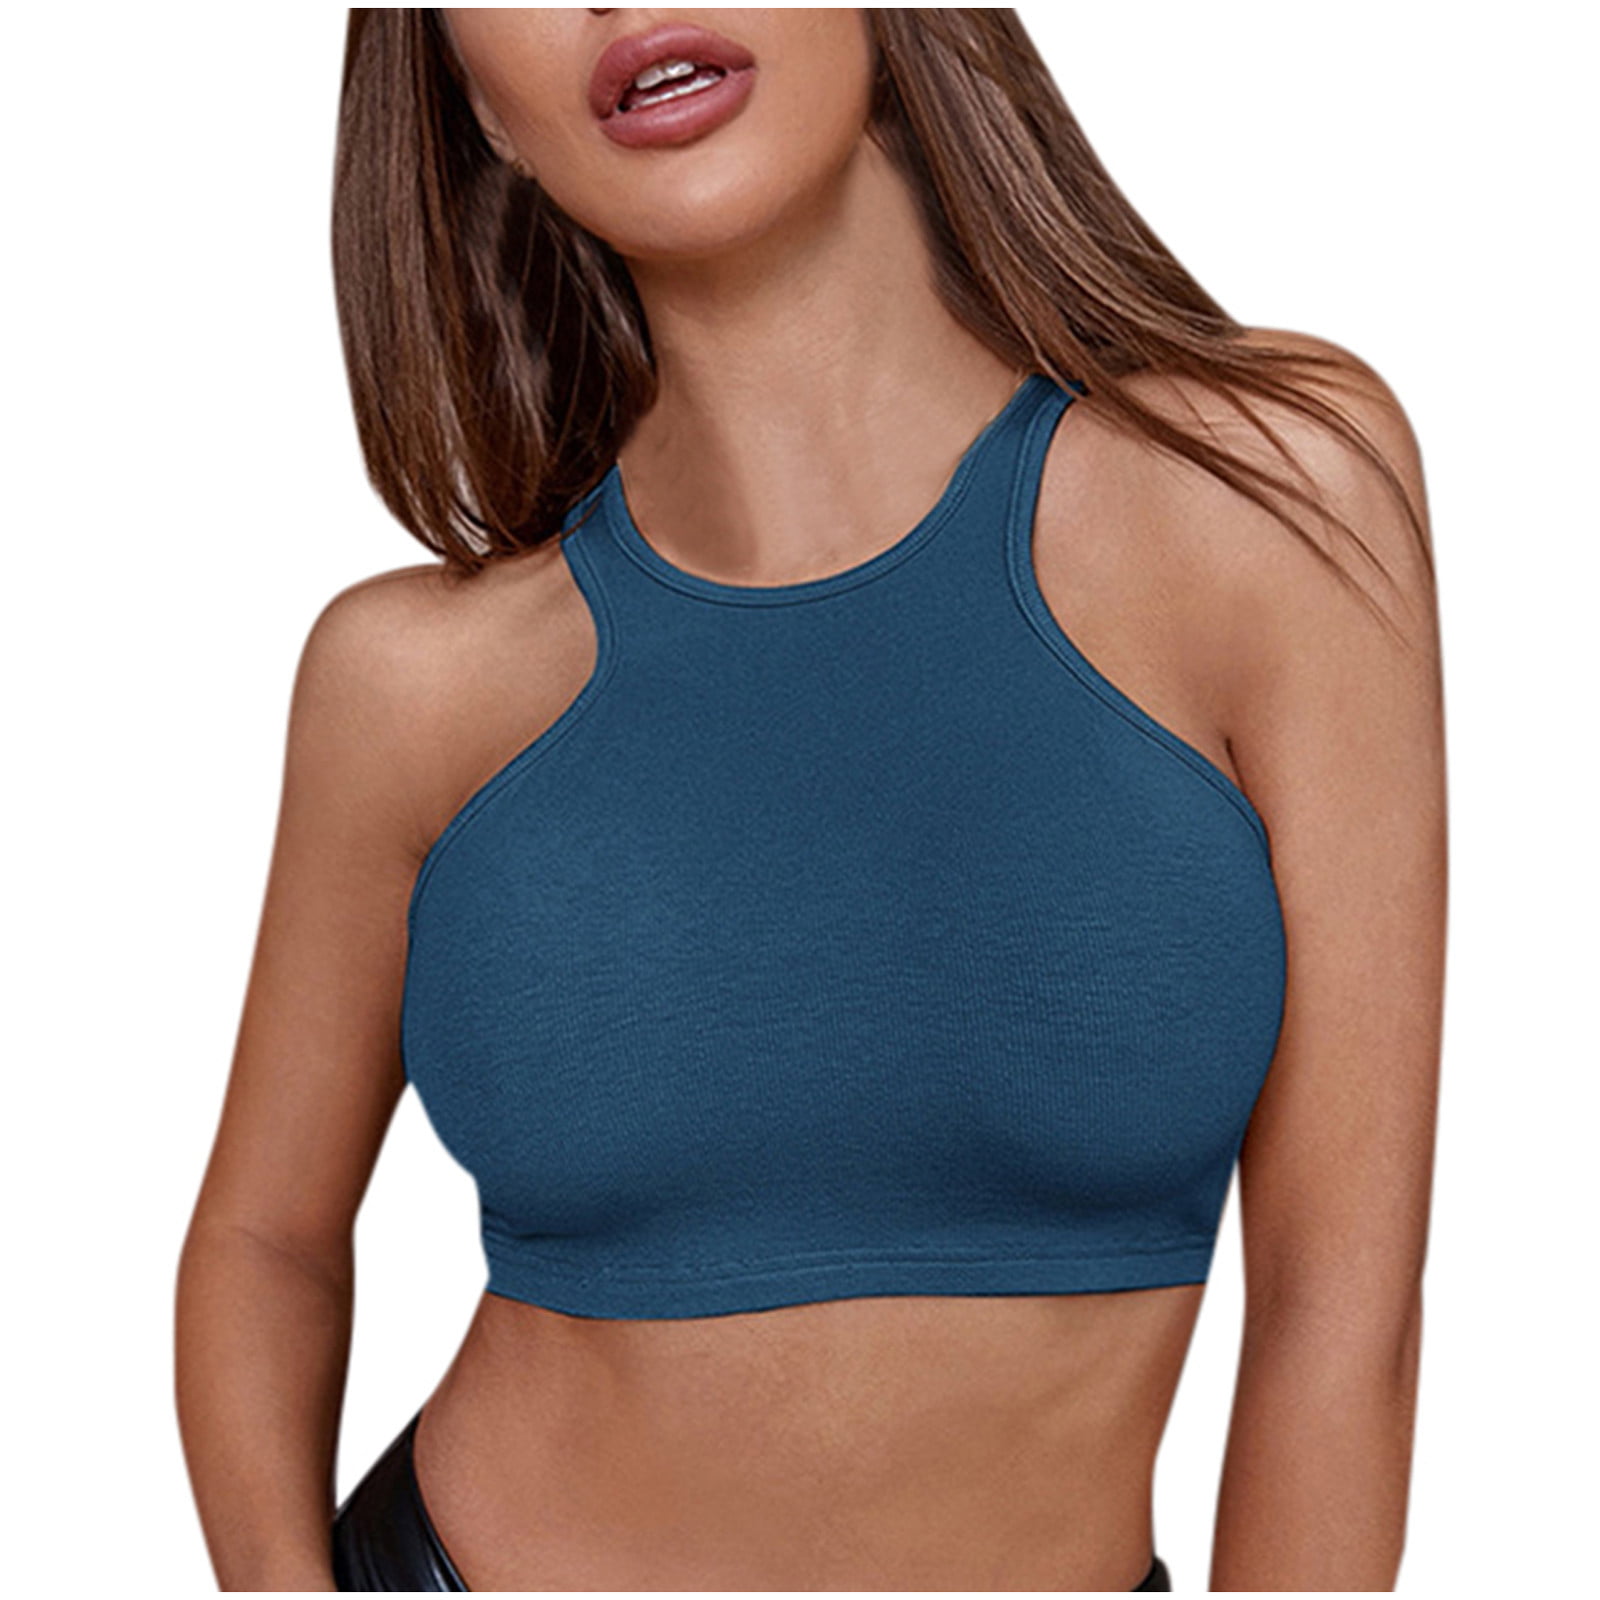 fvwitlyh Cropped Tank Top Women's Scoop Neck Spaghetti Strap Racerback  Sports Cami Tank Tops Blue Large